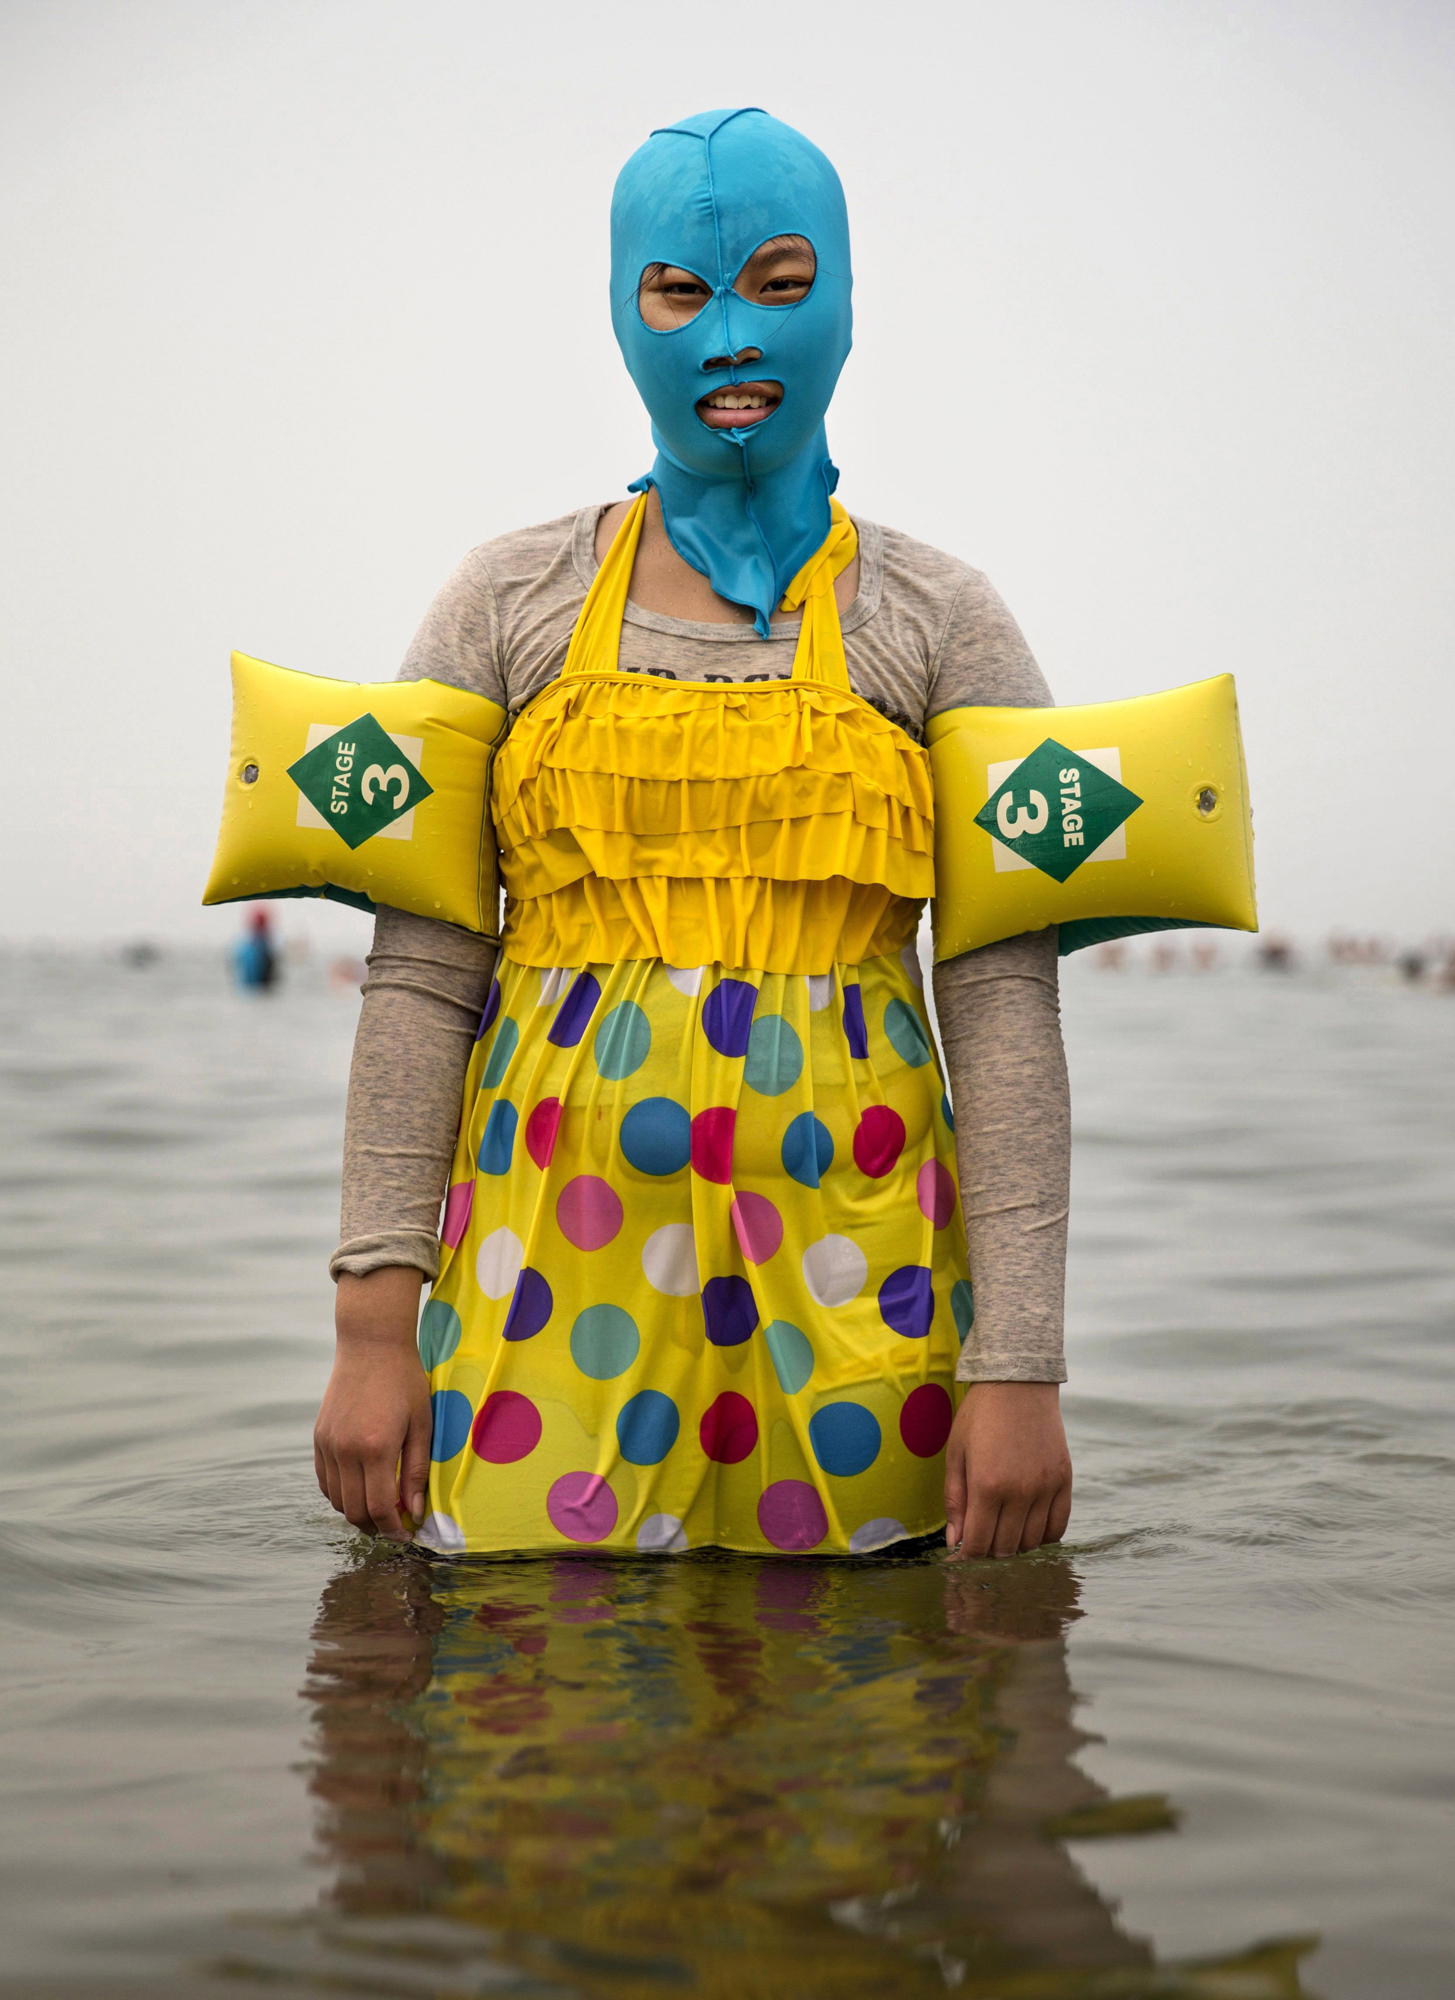 A woman wears a facekini as she poses on Aug. 21, 2014, in the Yellow Sea in Qingdao, China.